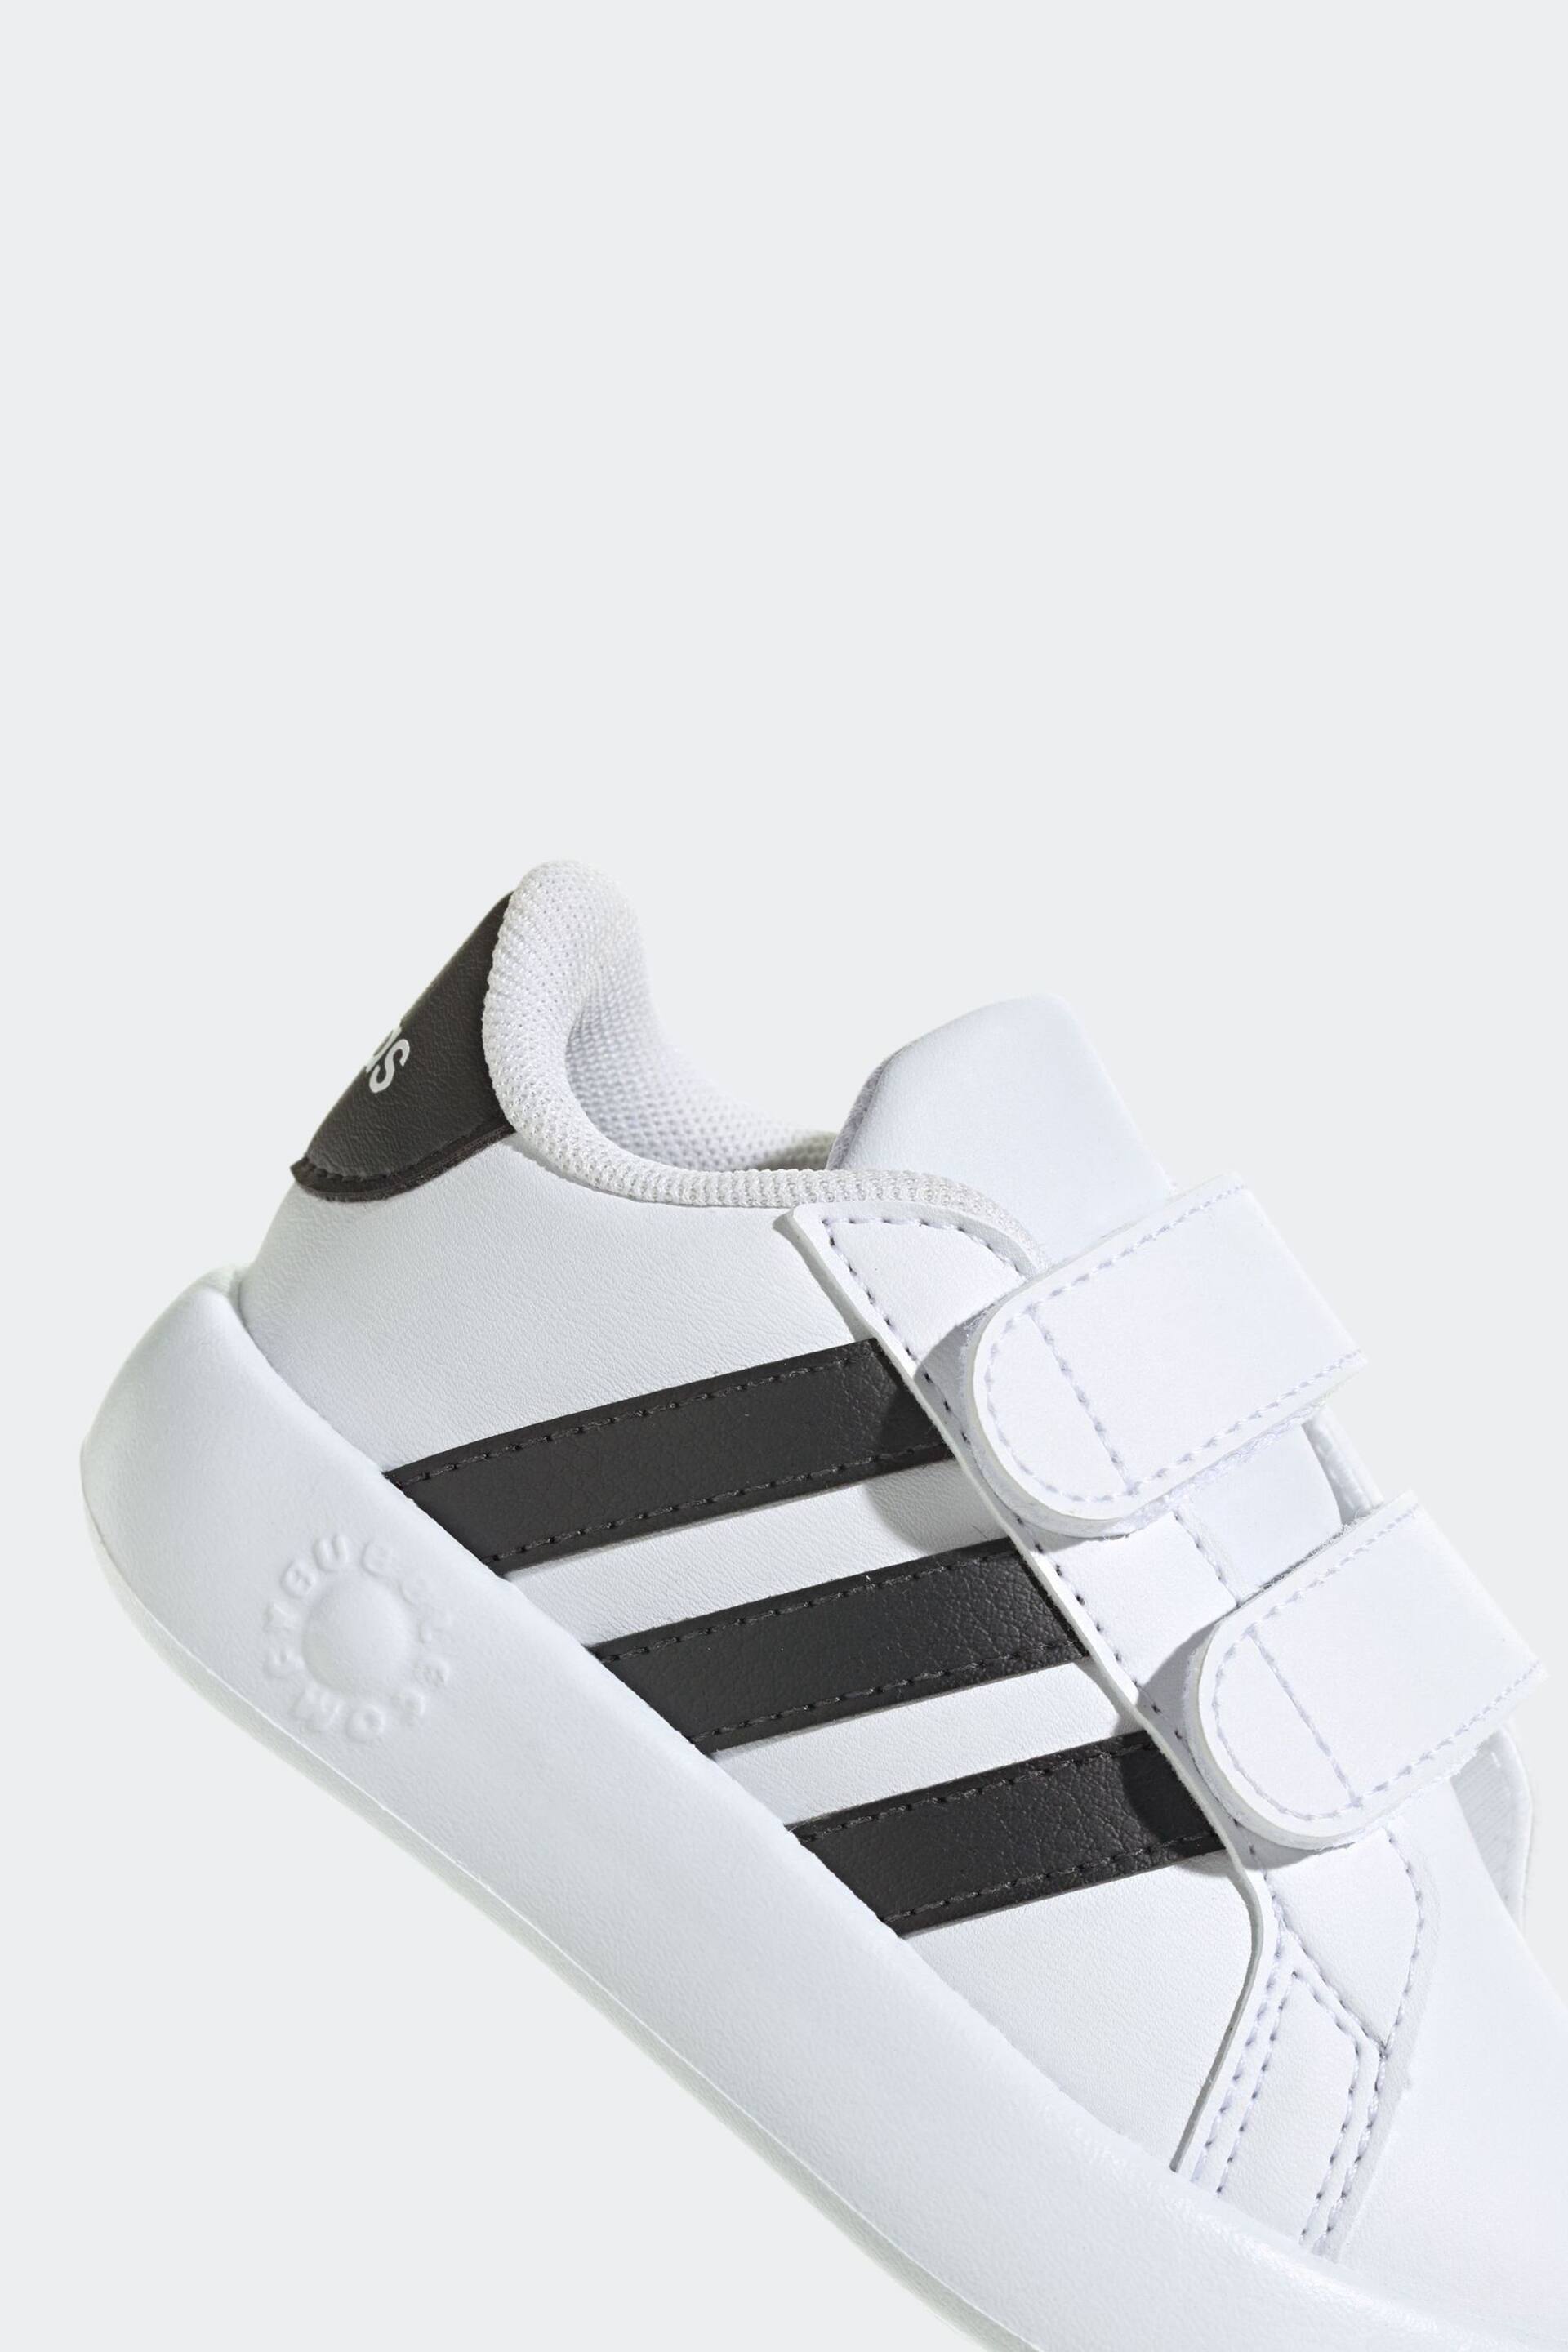 adidas Off White Kids Grand Court 2.0 Shoes - Image 8 of 9